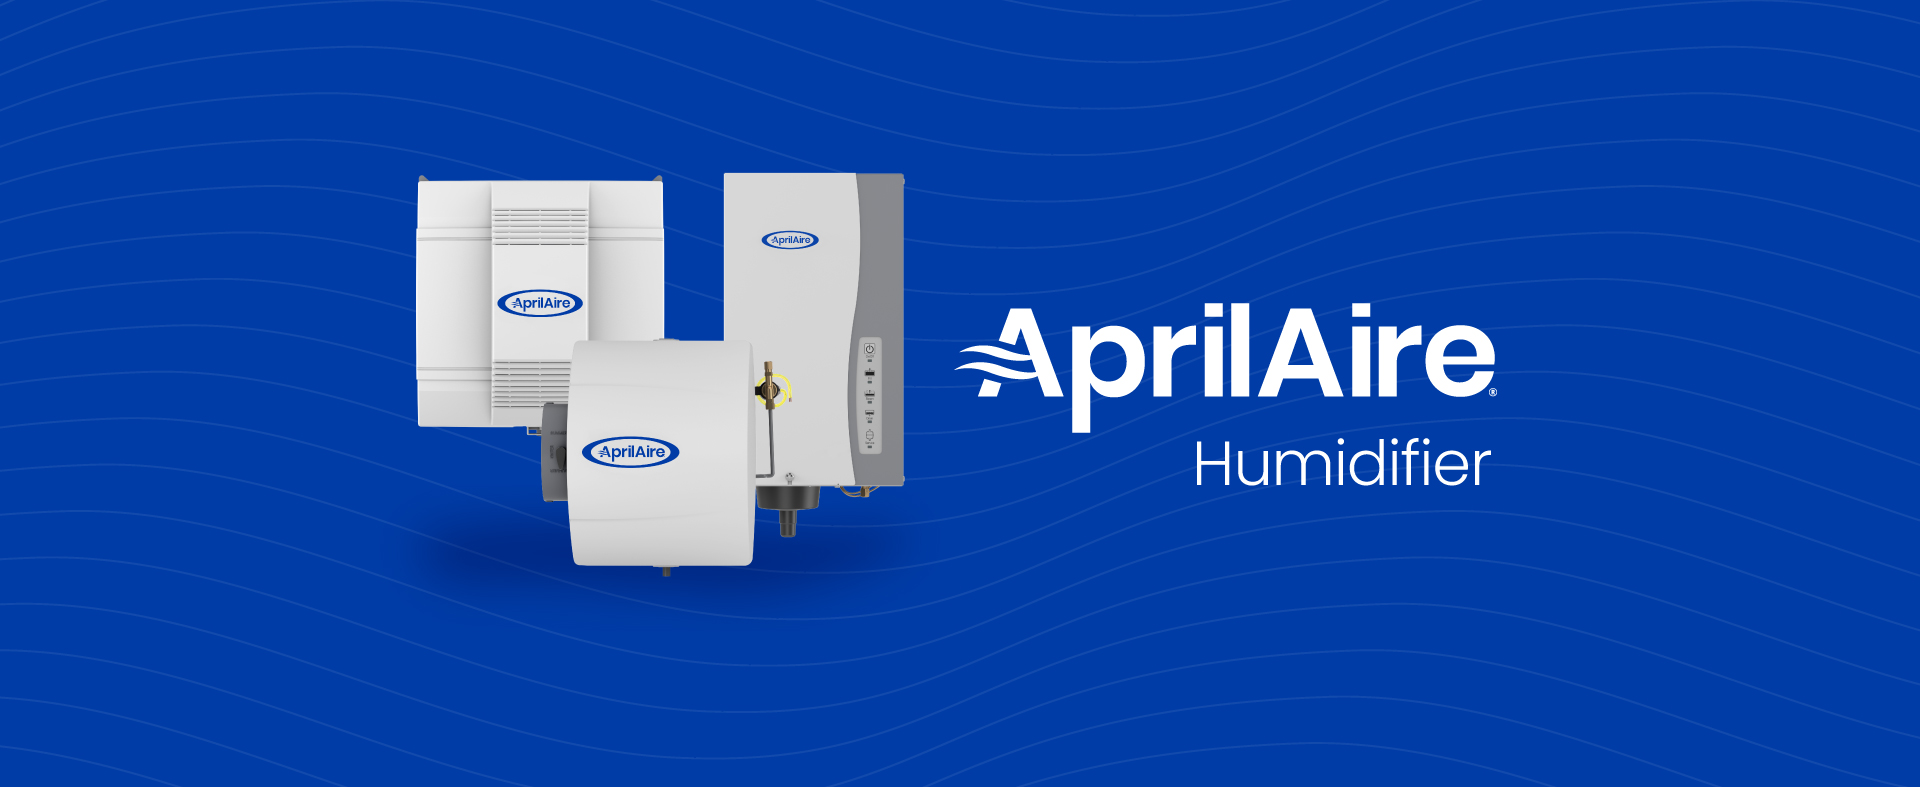 Aprilaire 300 Whole House Self-Contained Evaporative Humidifier